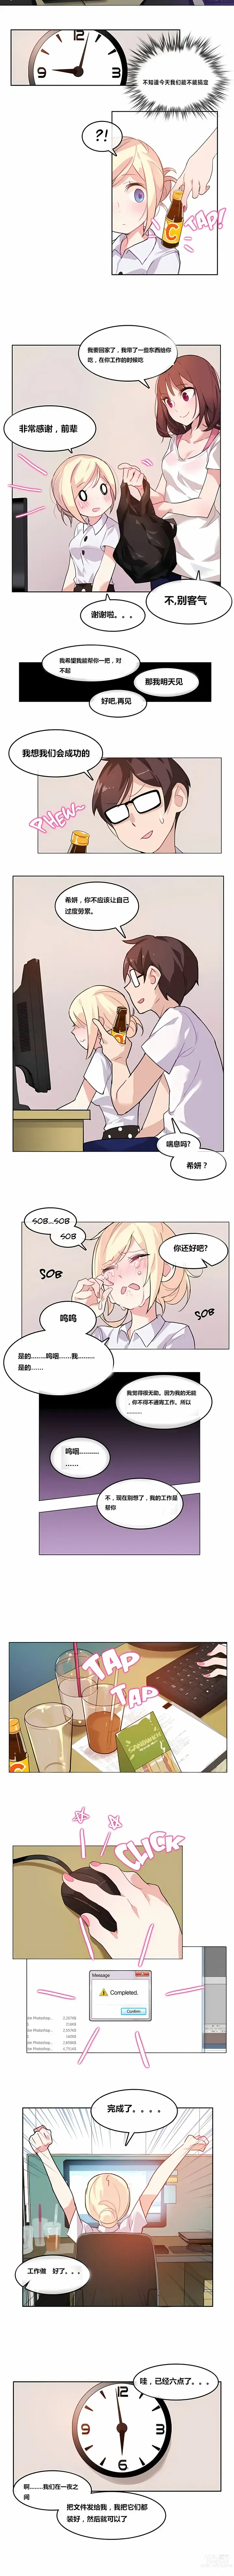 Page 24 of doujinshi A Pervert's Daily Life 第1-4季 1-144